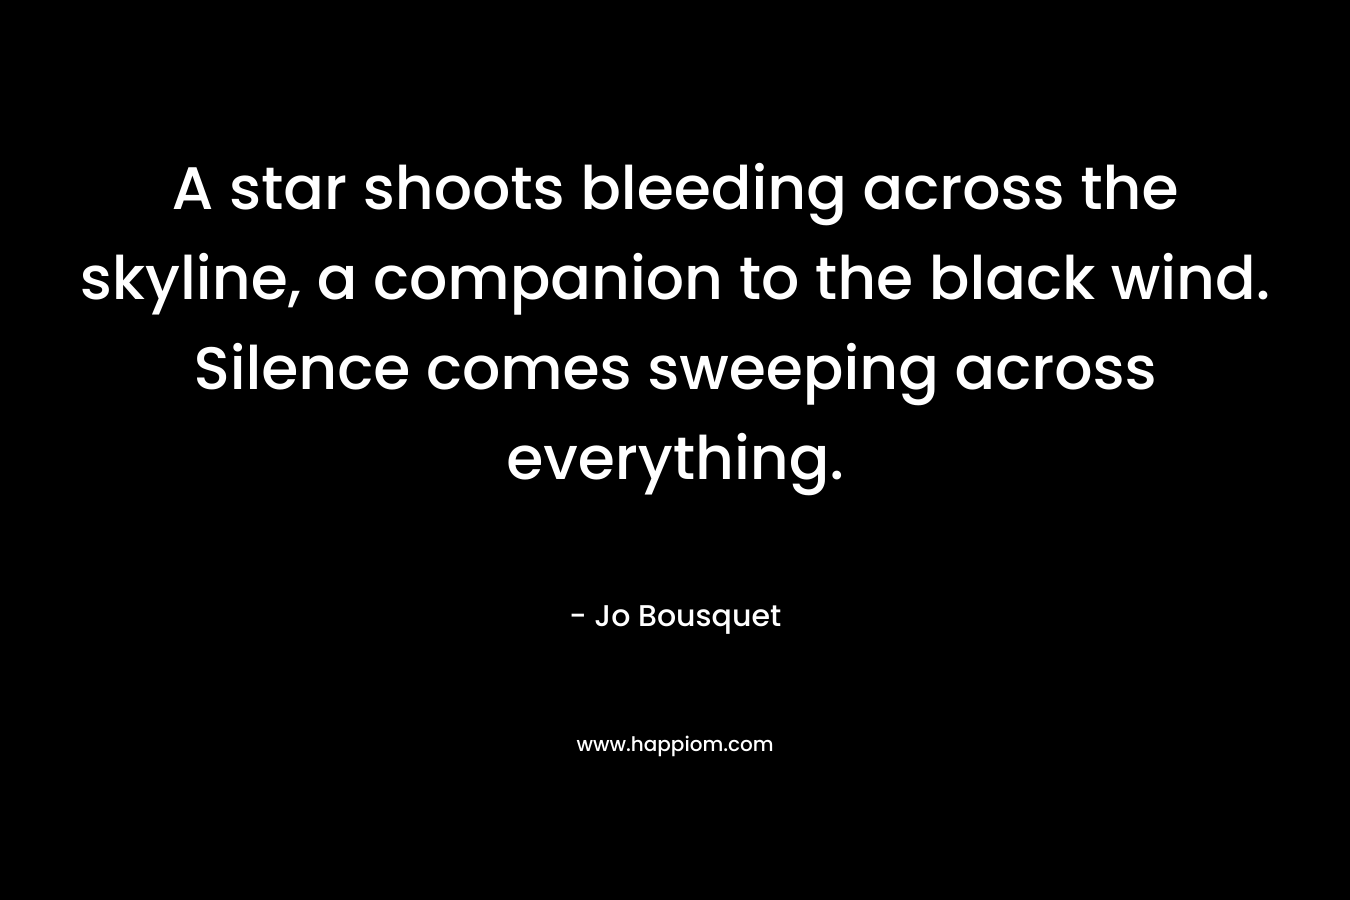 A star shoots bleeding across the skyline, a companion to the black wind. Silence comes sweeping across everything. – Jo Bousquet